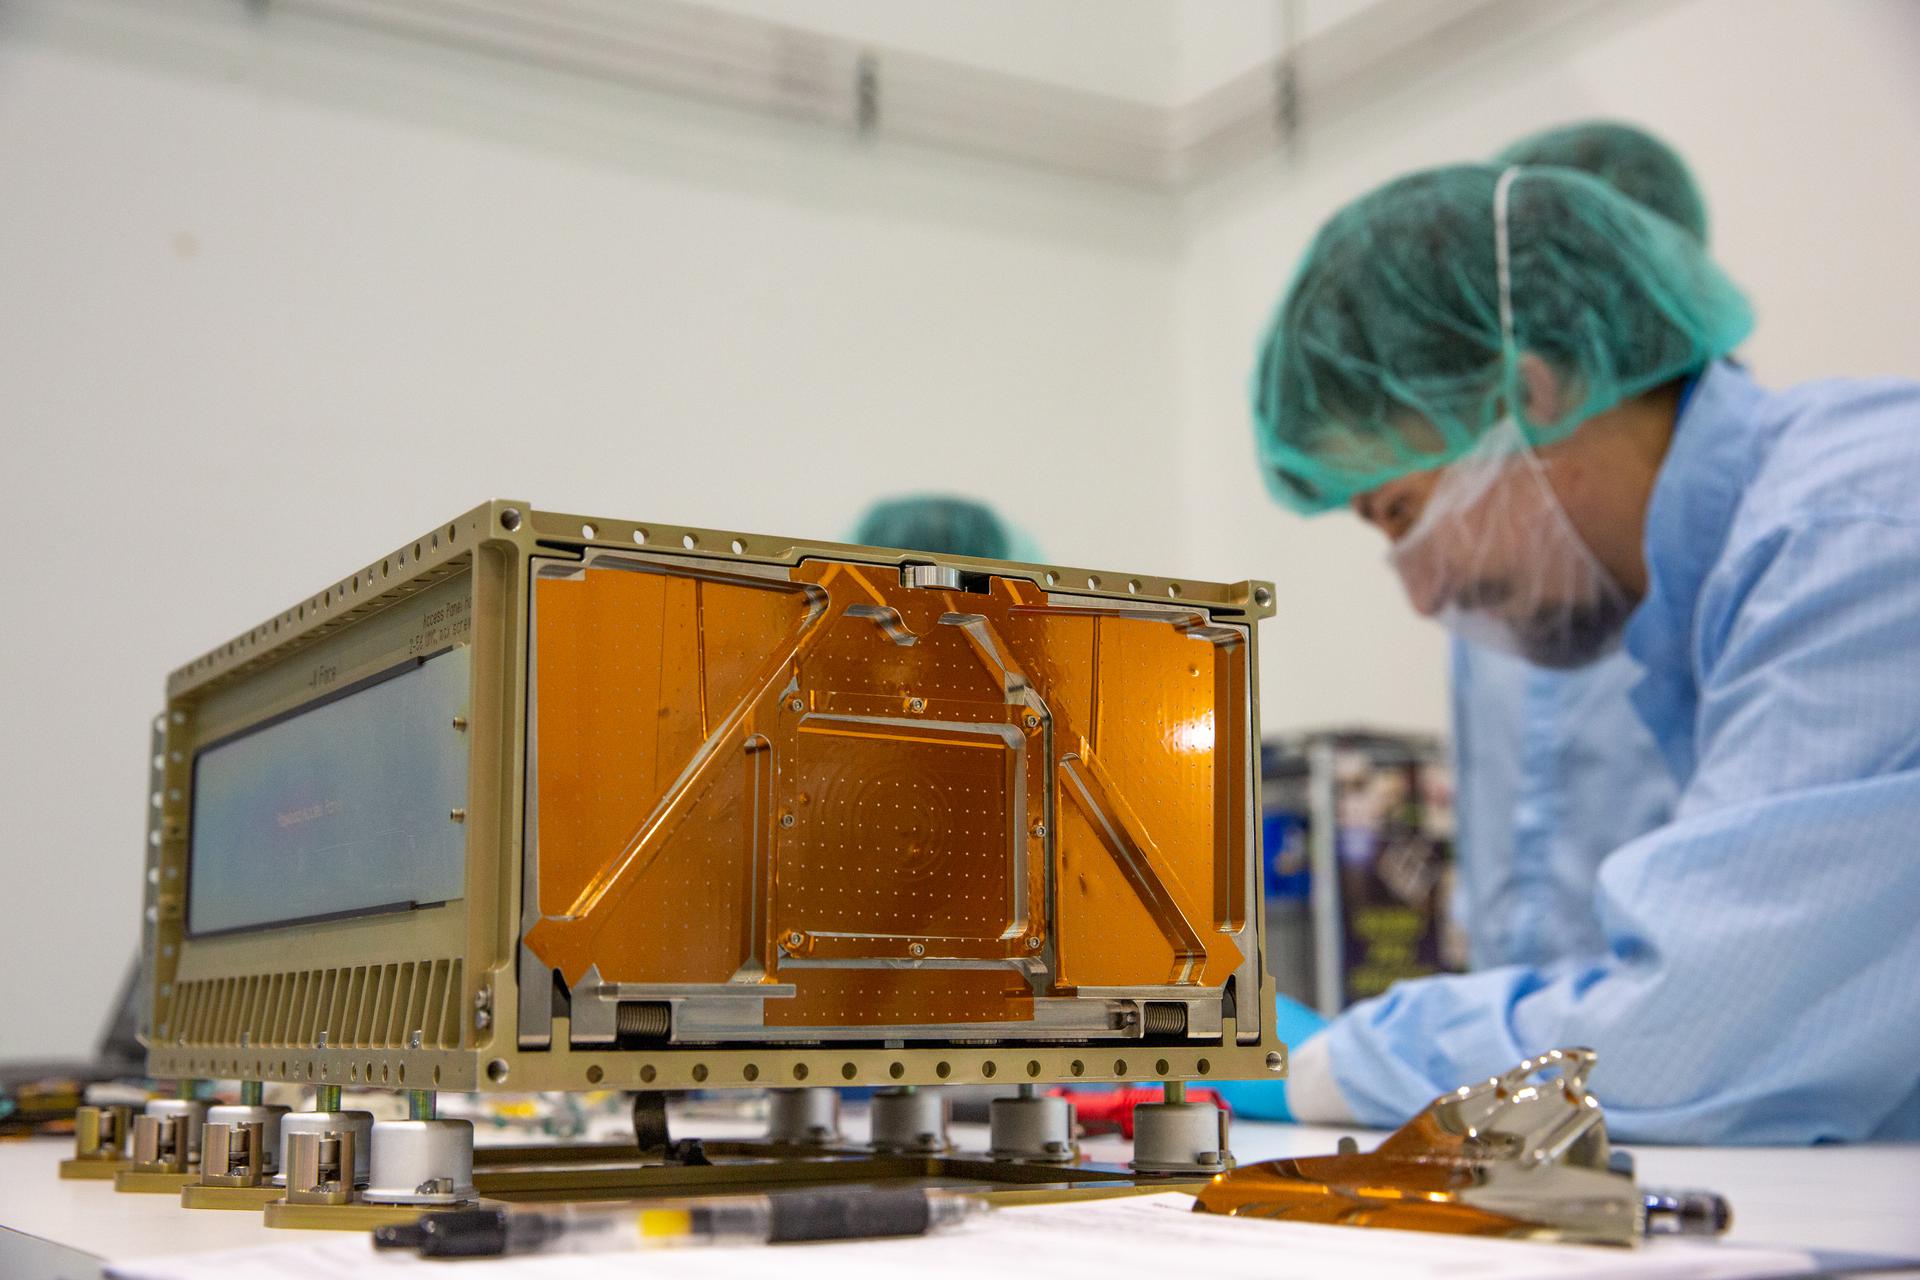 NASA scientists in clean suits work on a small shoebox-sized satellite.